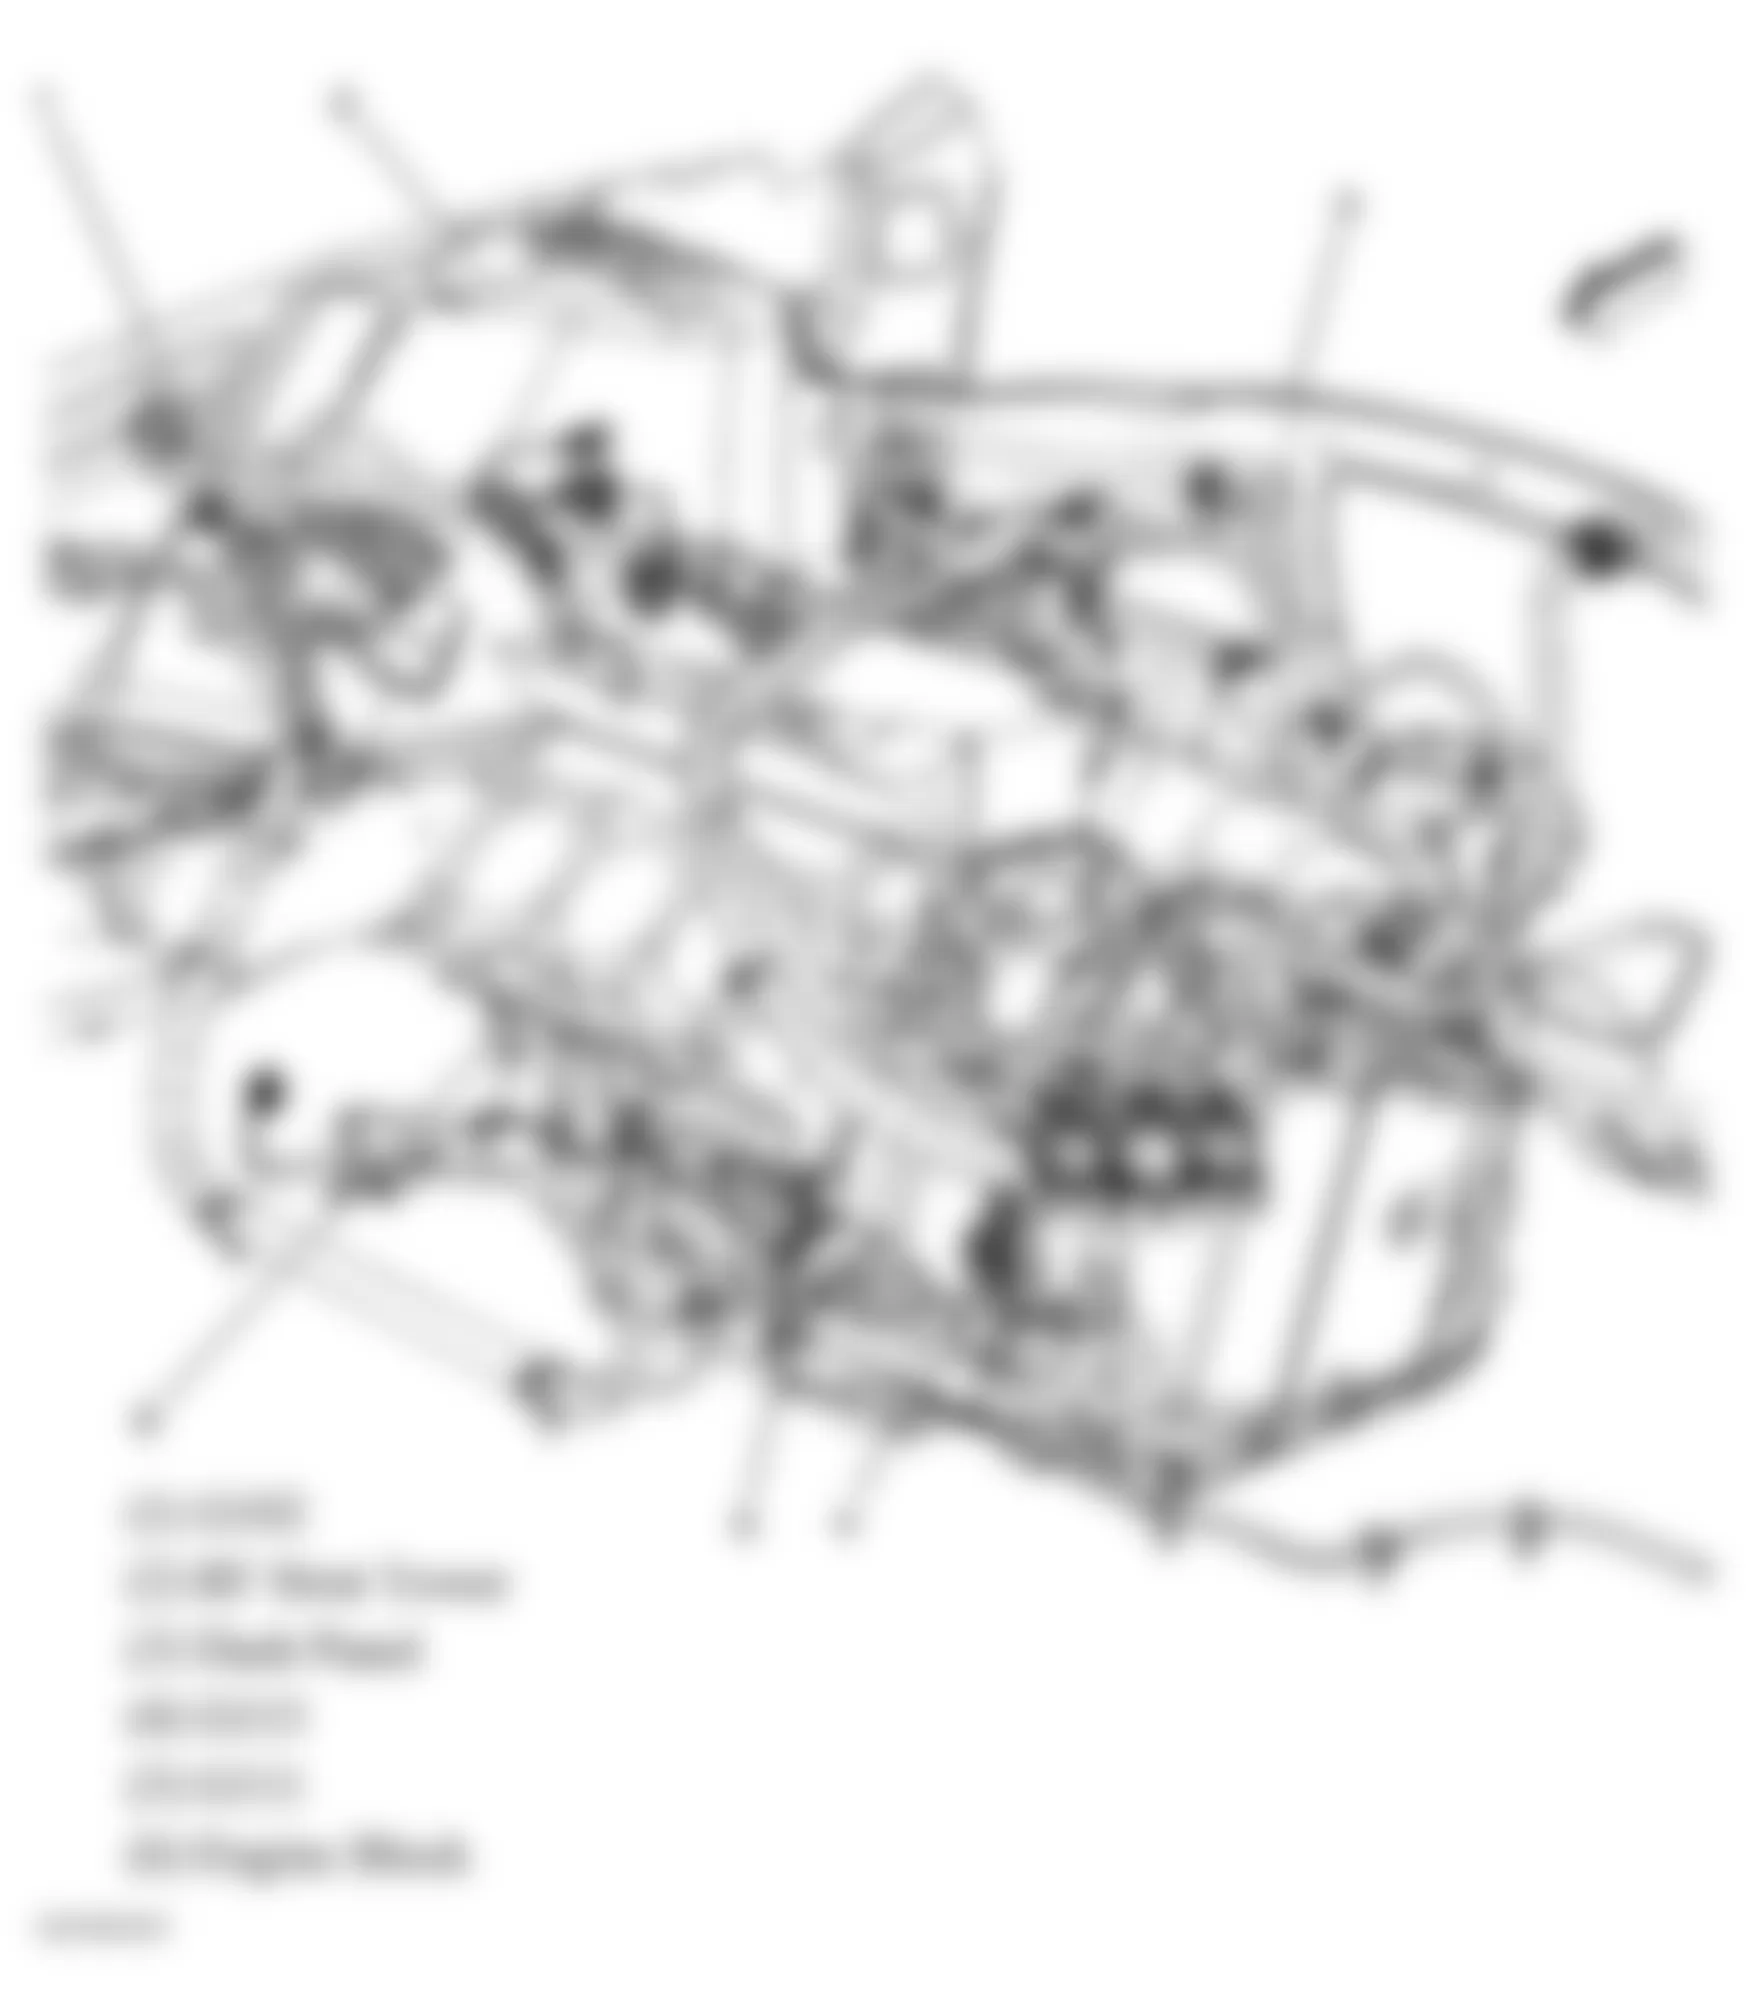 Buick Allure CXL 2005 - Component Locations -  Engine/Transmission Assembly